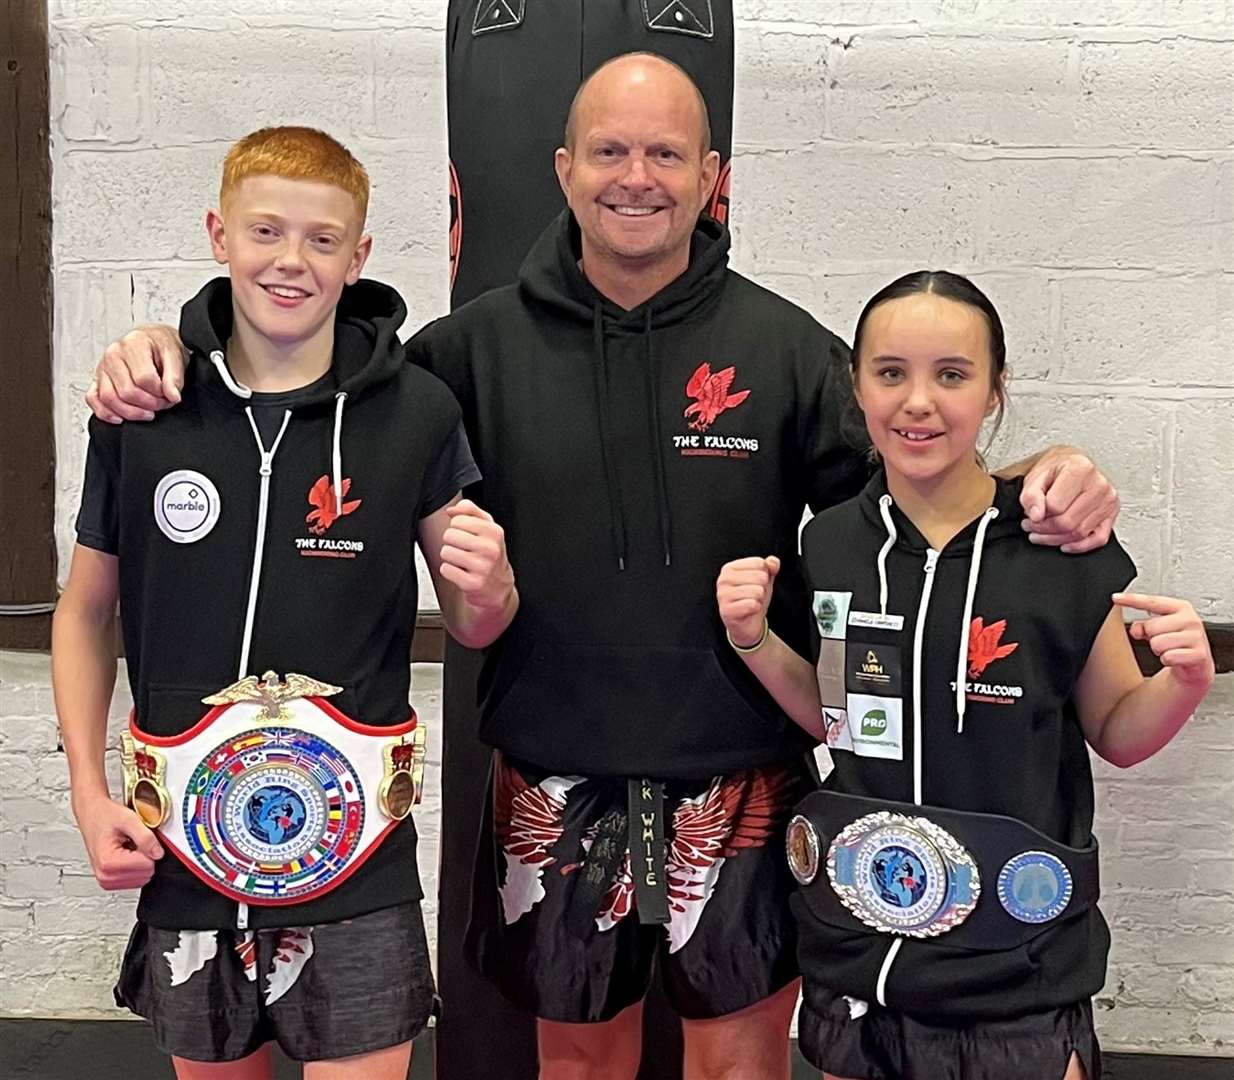 The Falcons Kickboxing Club head coach Mark White, centre, with their new junior world champions, Aston Young, 14, and 12-year-old Cleo Musslewhite